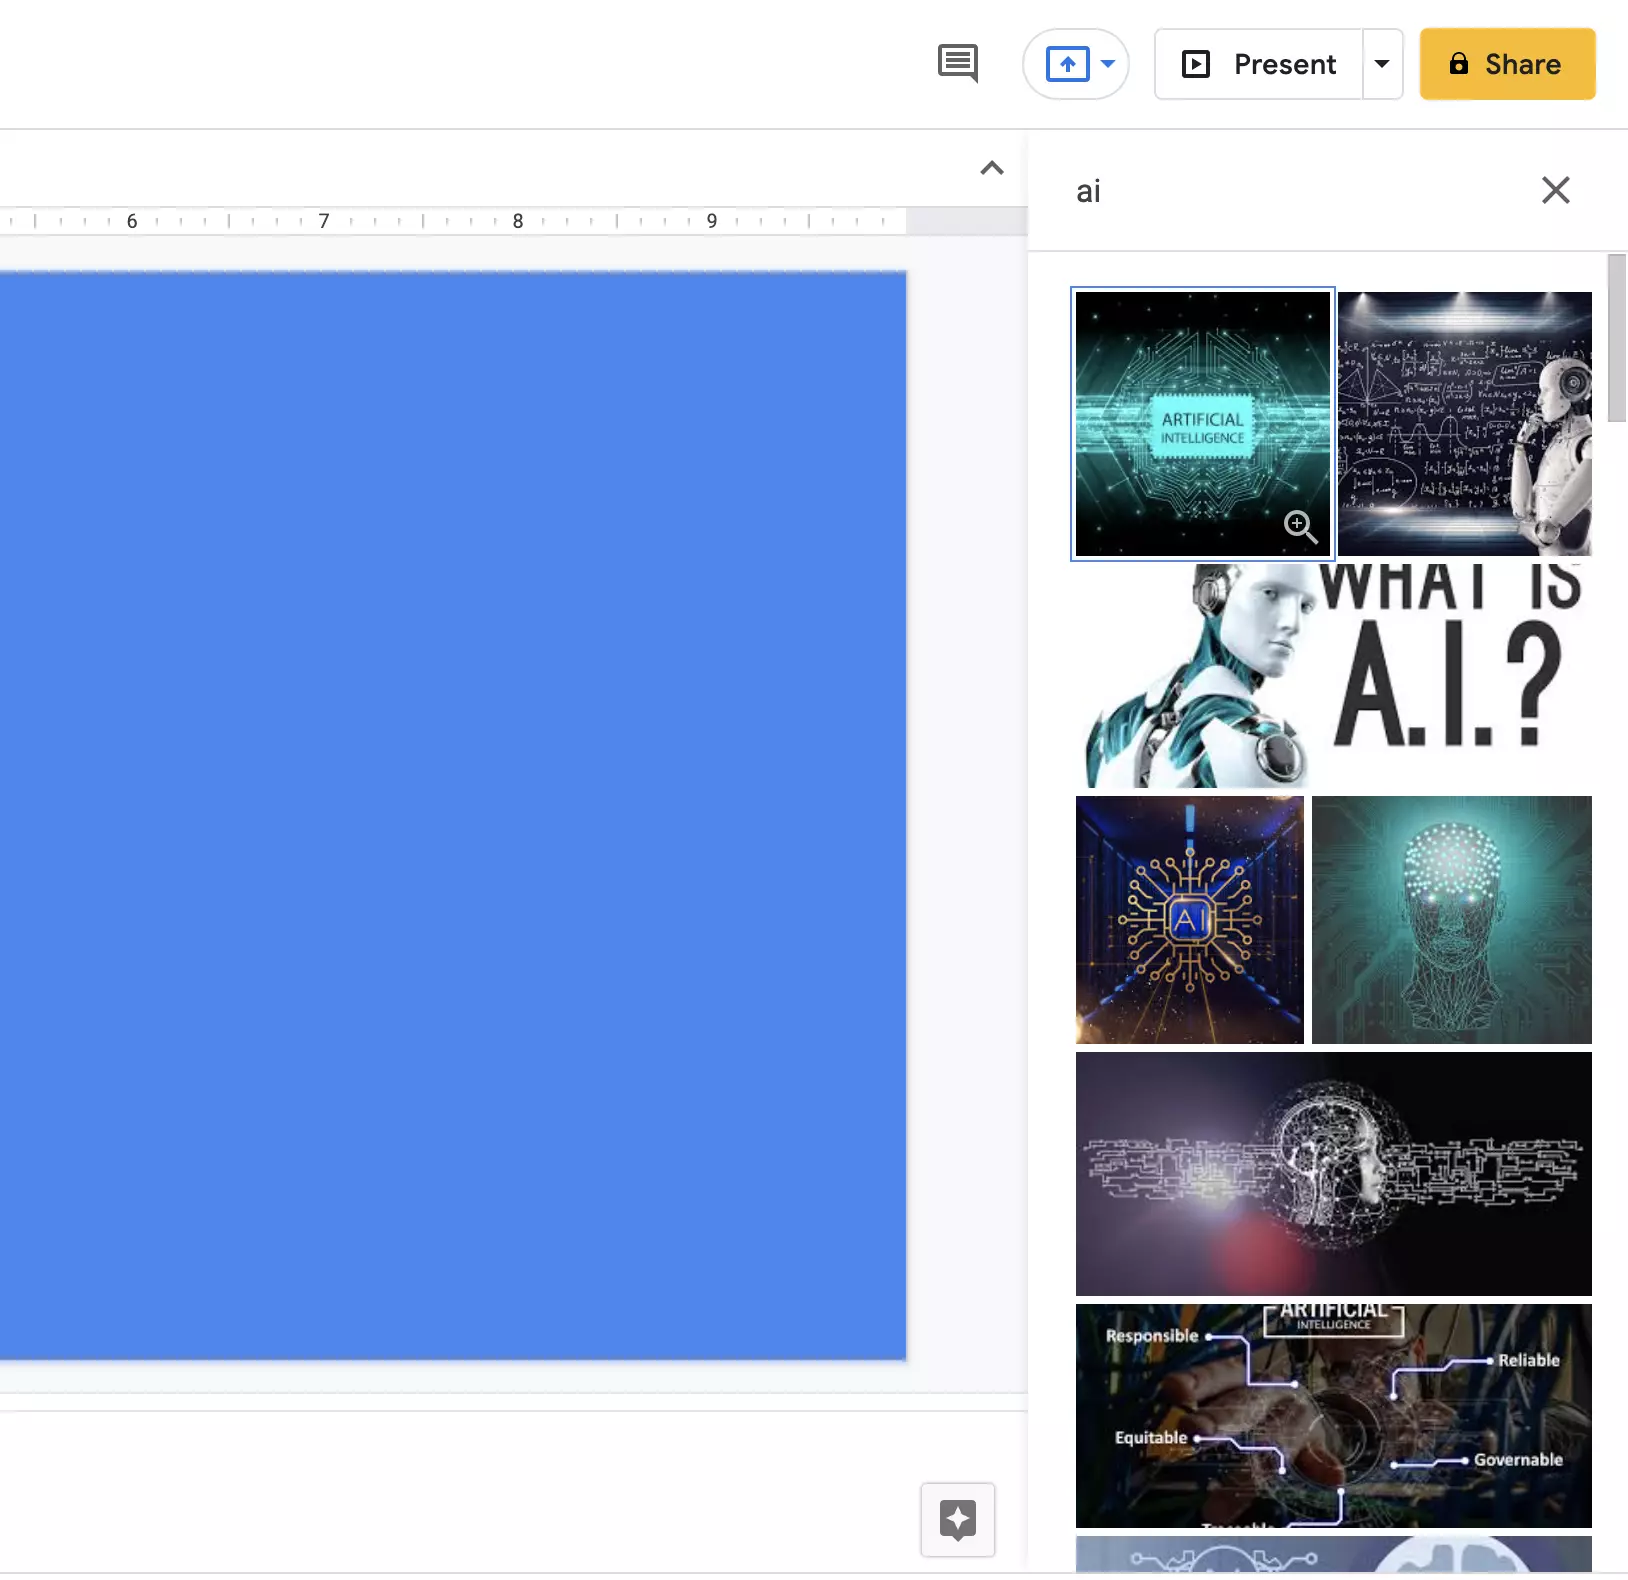 Step 6: Find image through the search bar